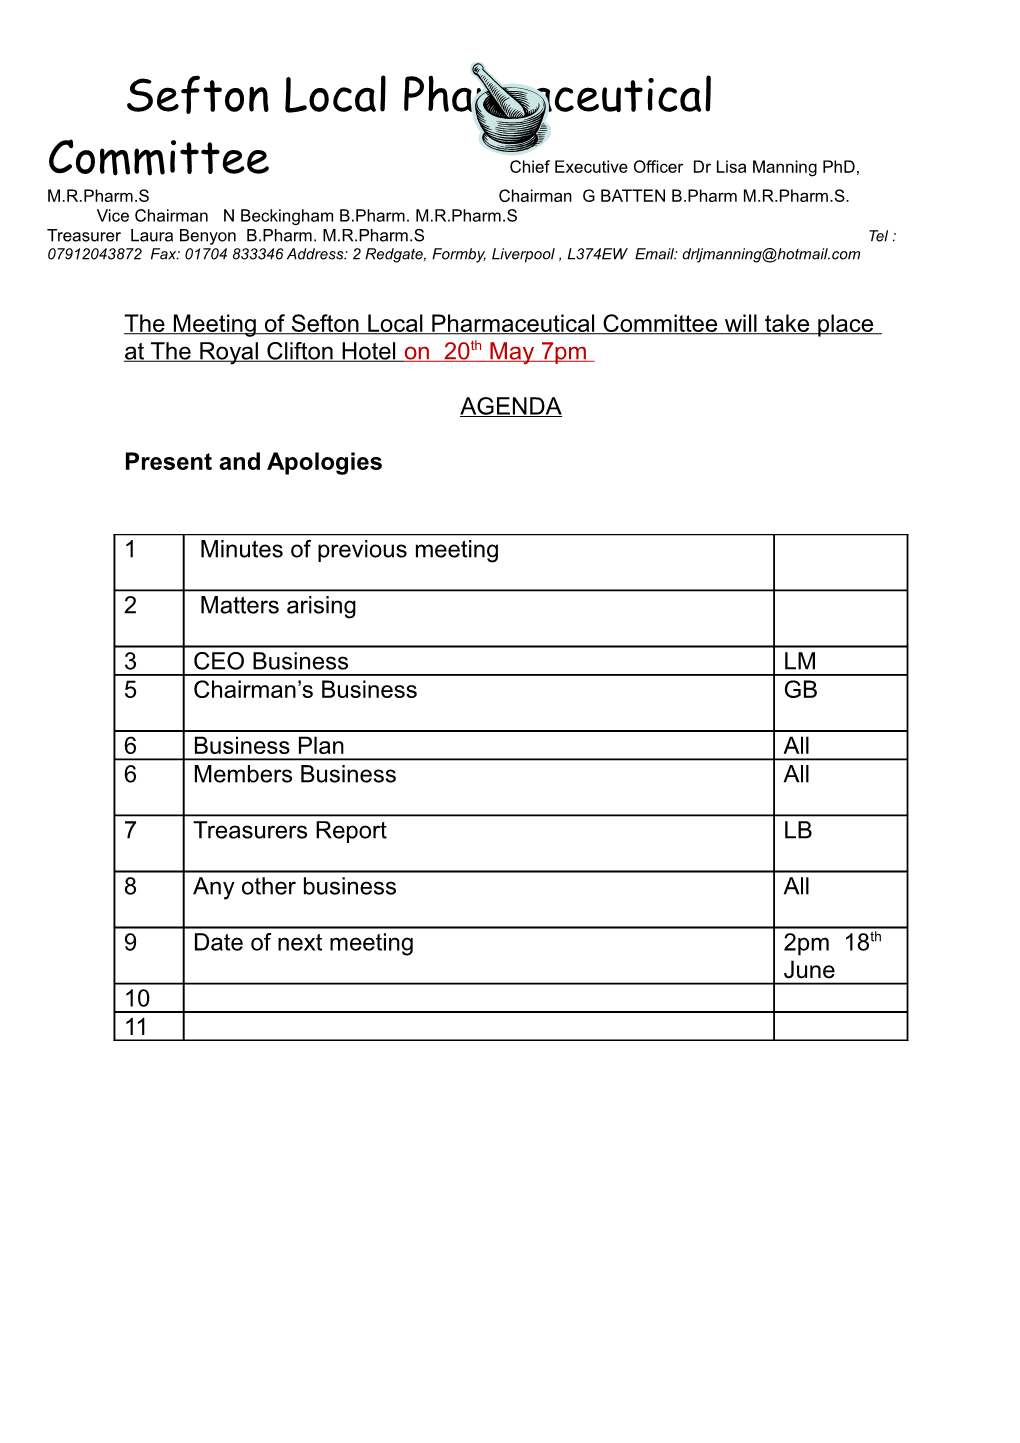 Sefton Local Pharmaceutical Committee Minutes